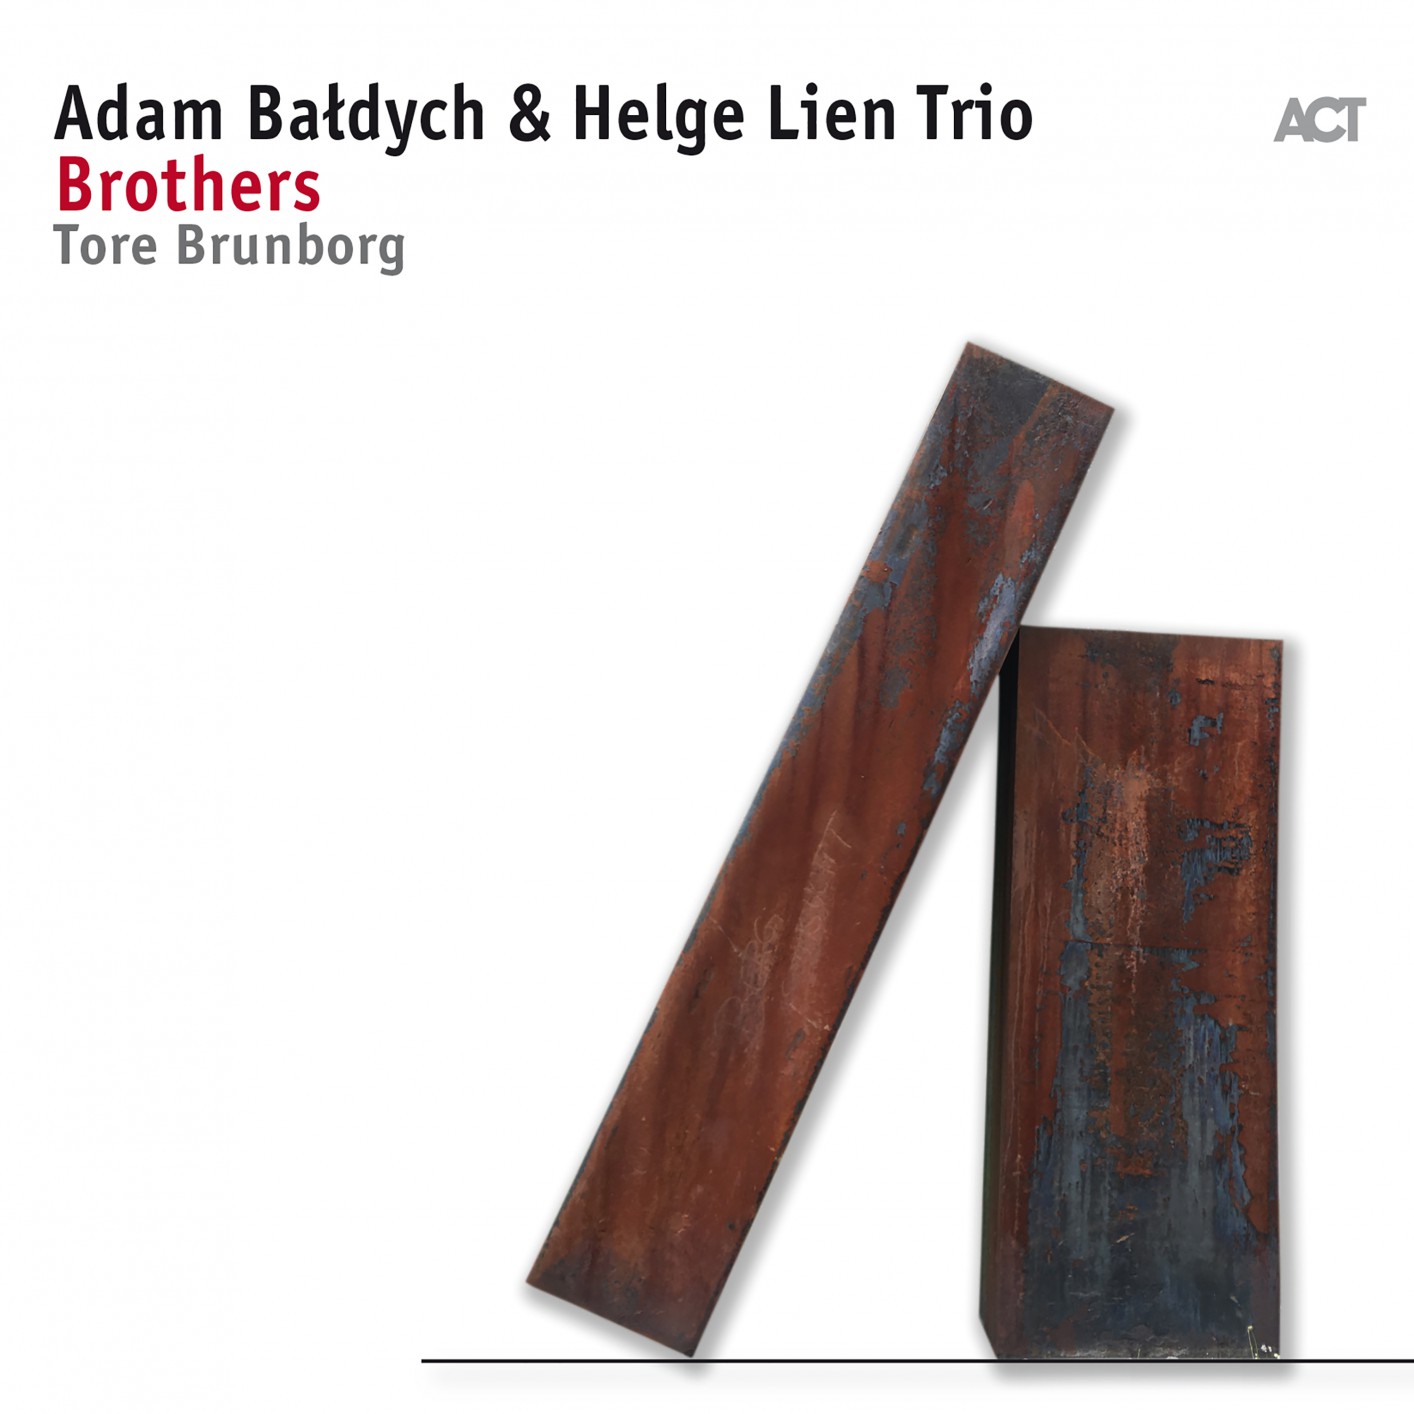 Adam Baldych with Helge Lien Trio & Tore Brunborg - Brothers (2017) [FLAC 24bit/88,2kHz]